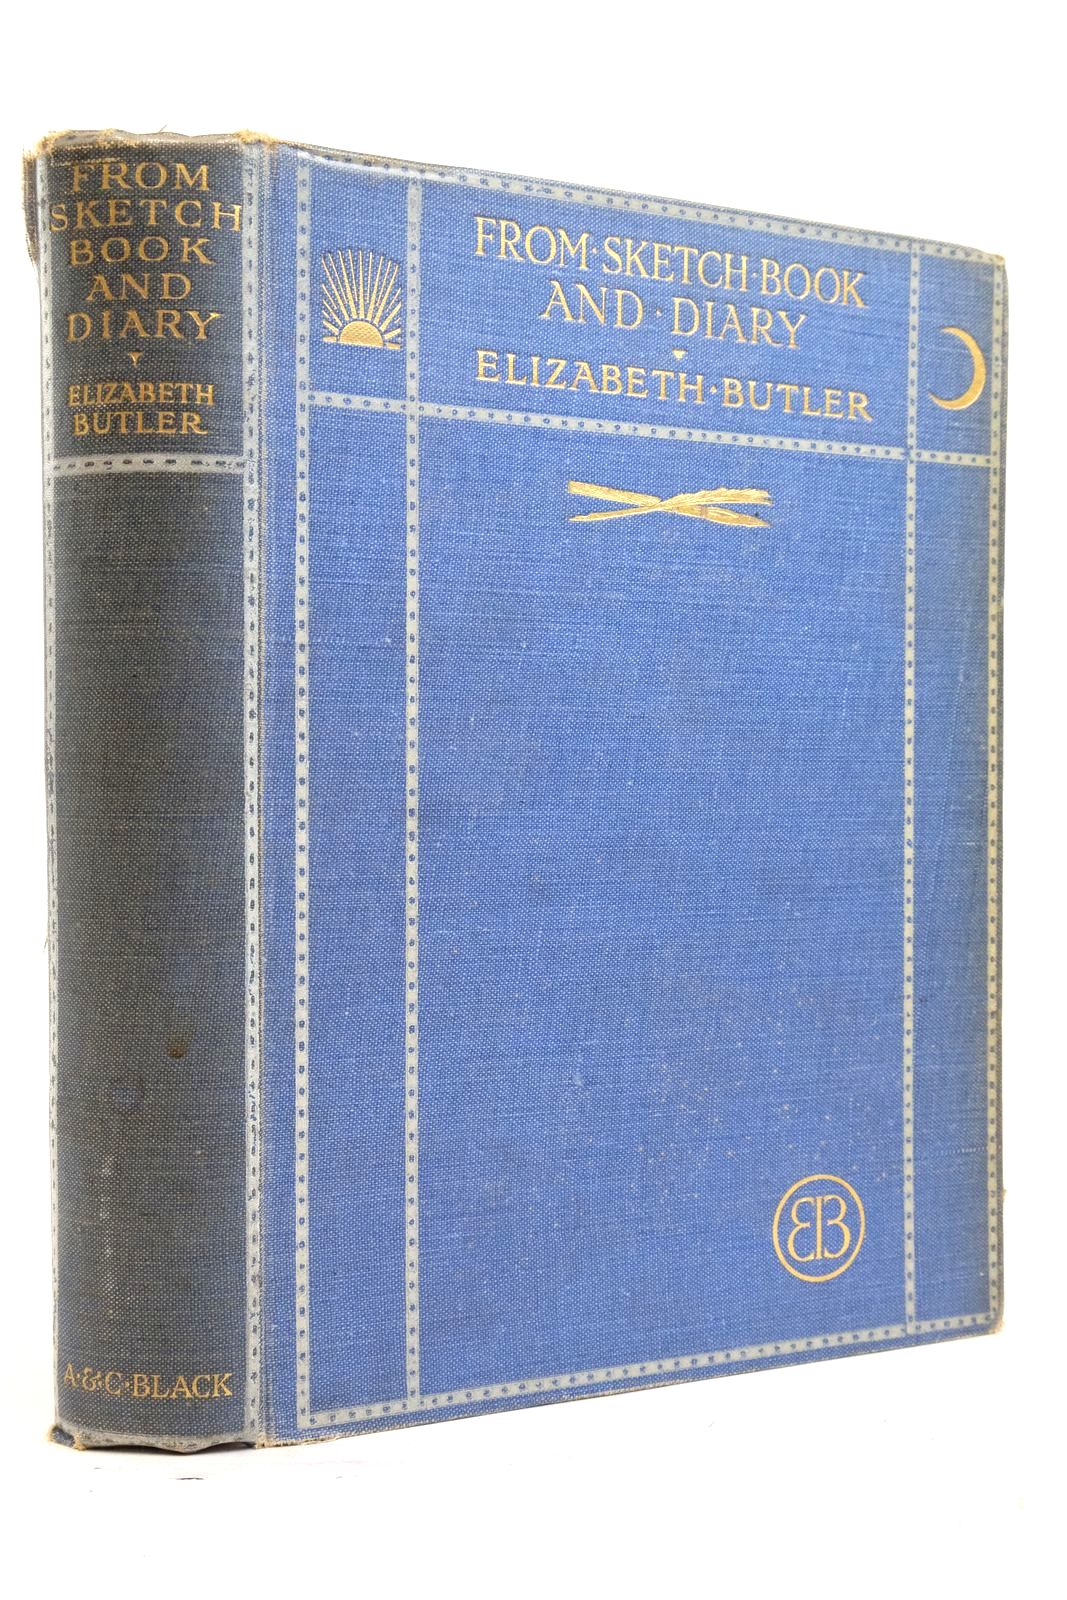 Photo of FROM SKETCH-BOOK AND DIARY written by Butler, Elizabeth illustrated by Butler, Elizabeth published by Adam & Charles Black (STOCK CODE: 2137357)  for sale by Stella & Rose's Books